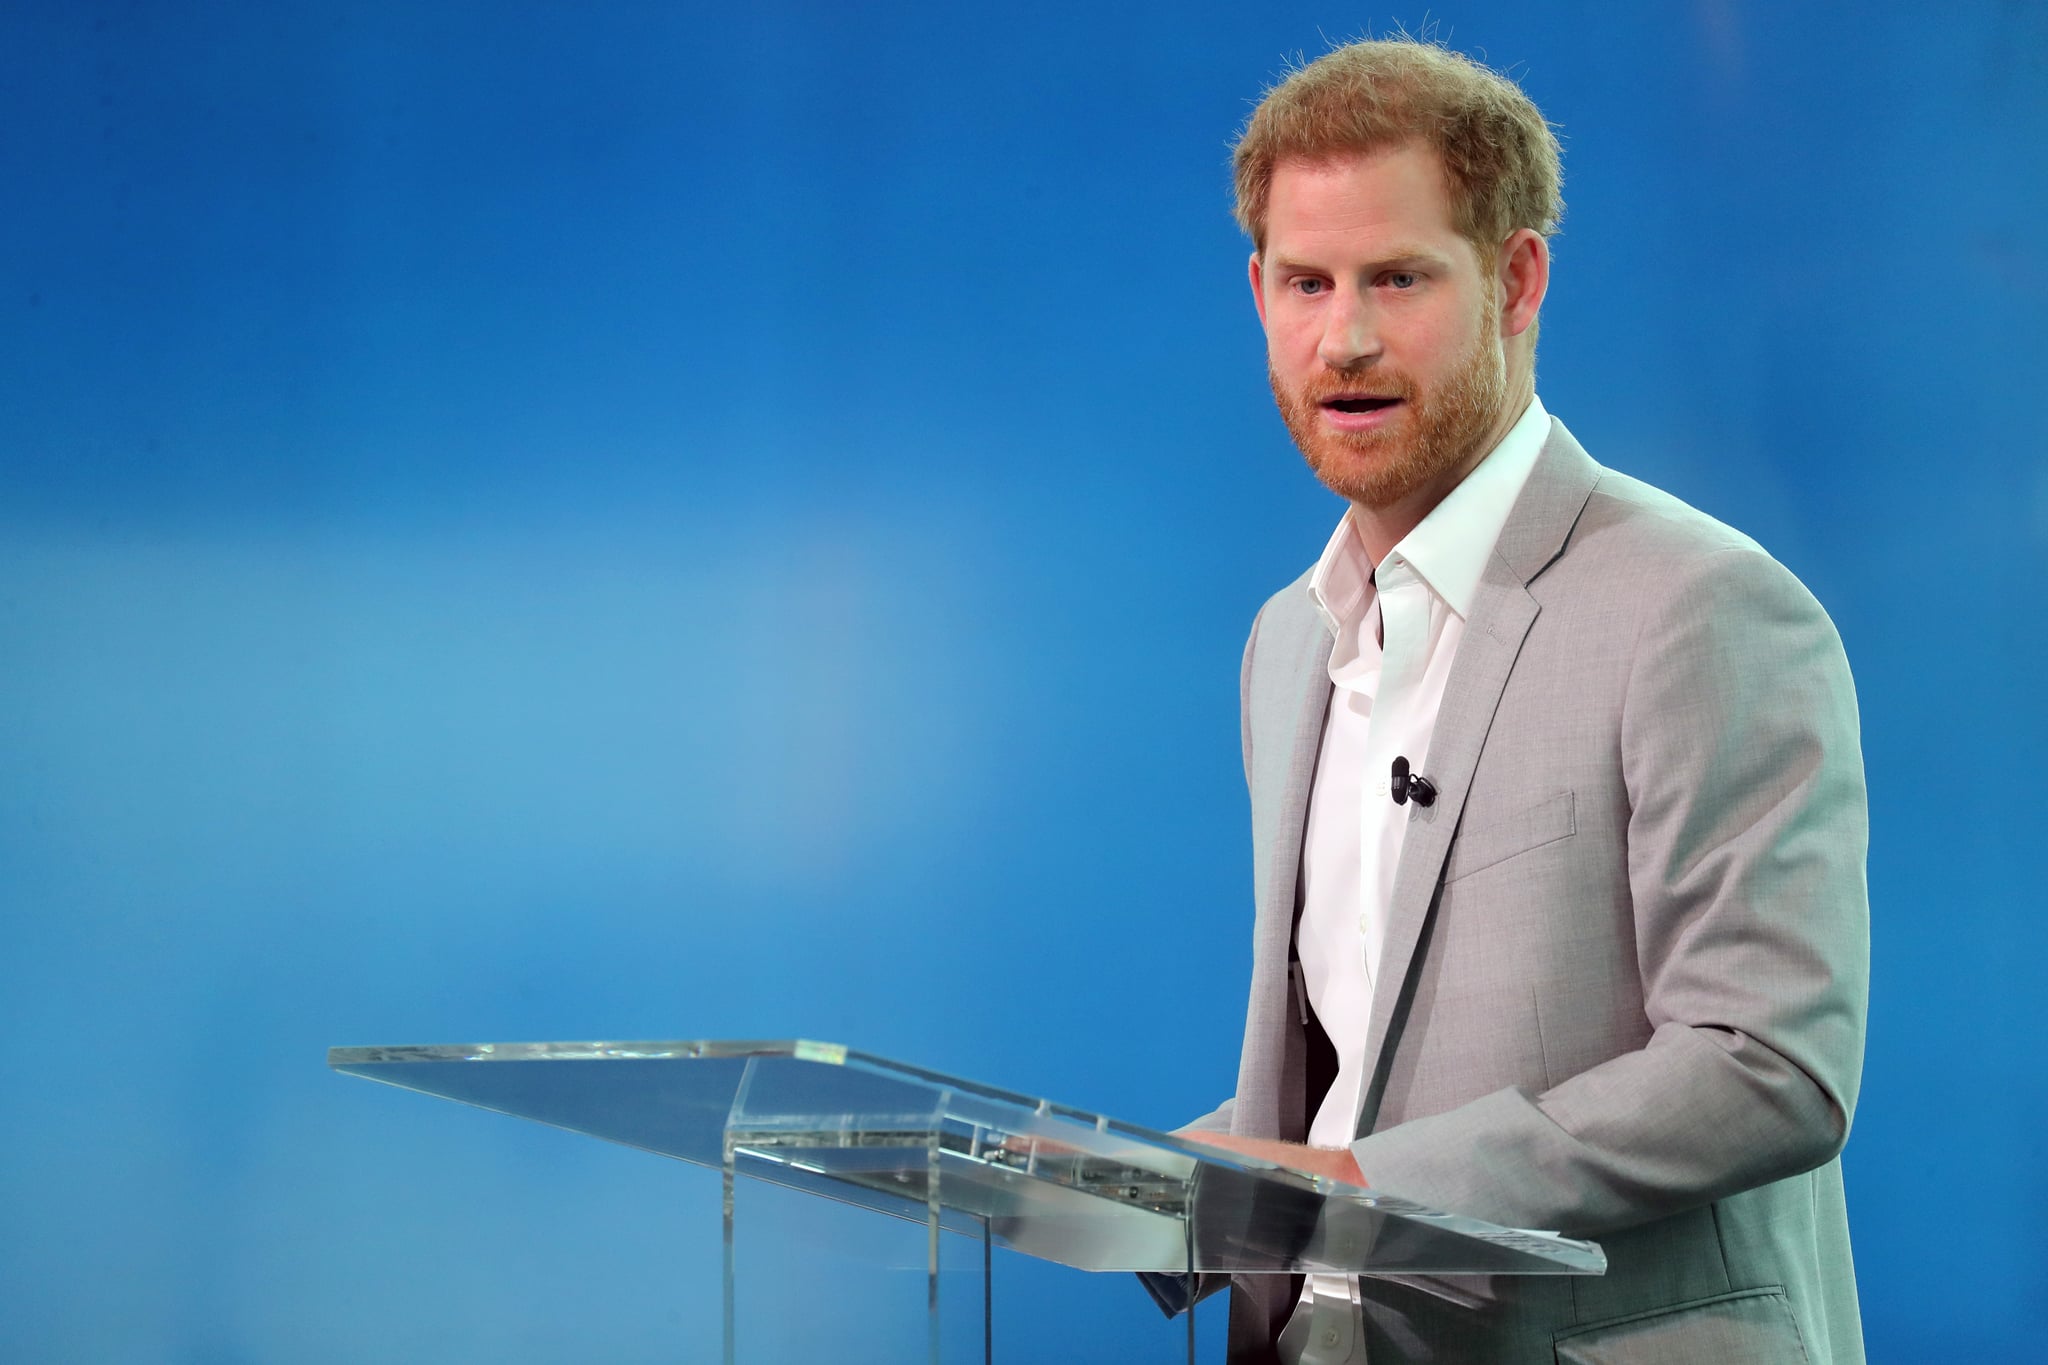 AMSTERDAM, NETHERLANDS - SEPTEMBER 03: Prince Harry, Duke of Sussex announces a partnership between Booking.com, SkyScanner, CTrip, TripAdvisor and Visa called